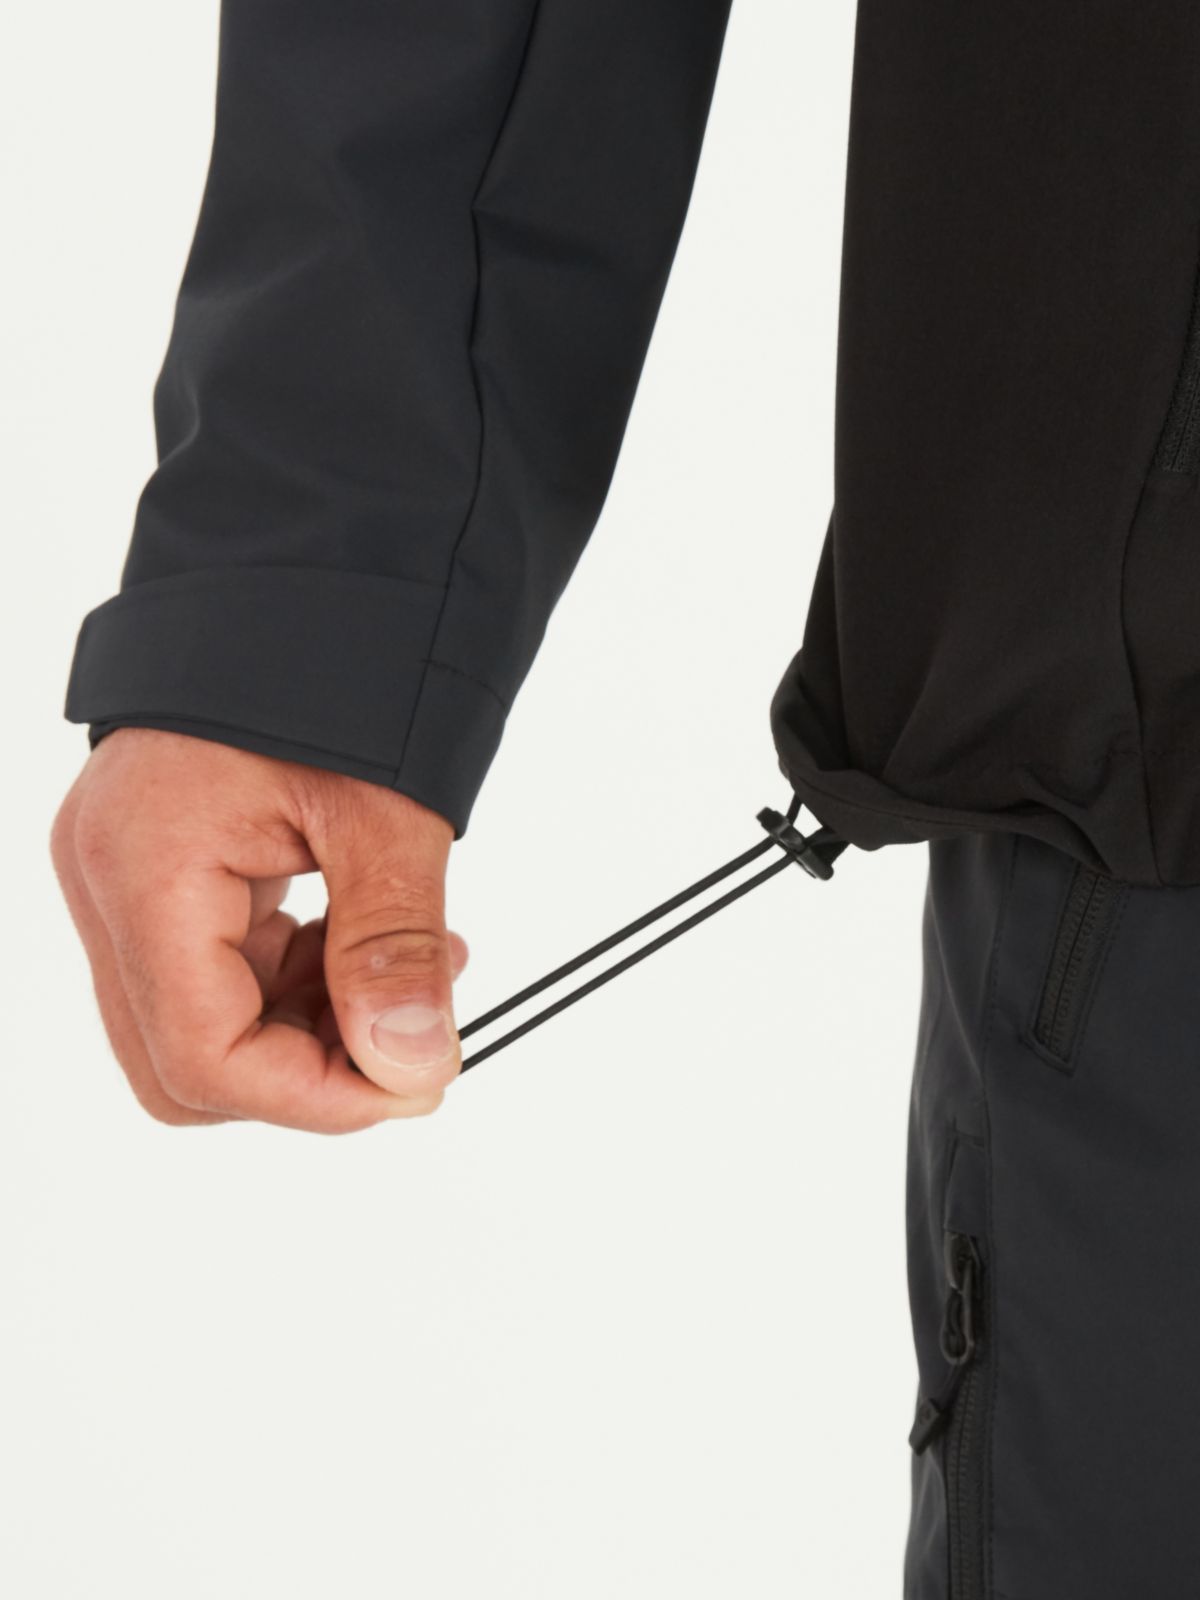 rain jacket tie at bottom to prevent wind from entering